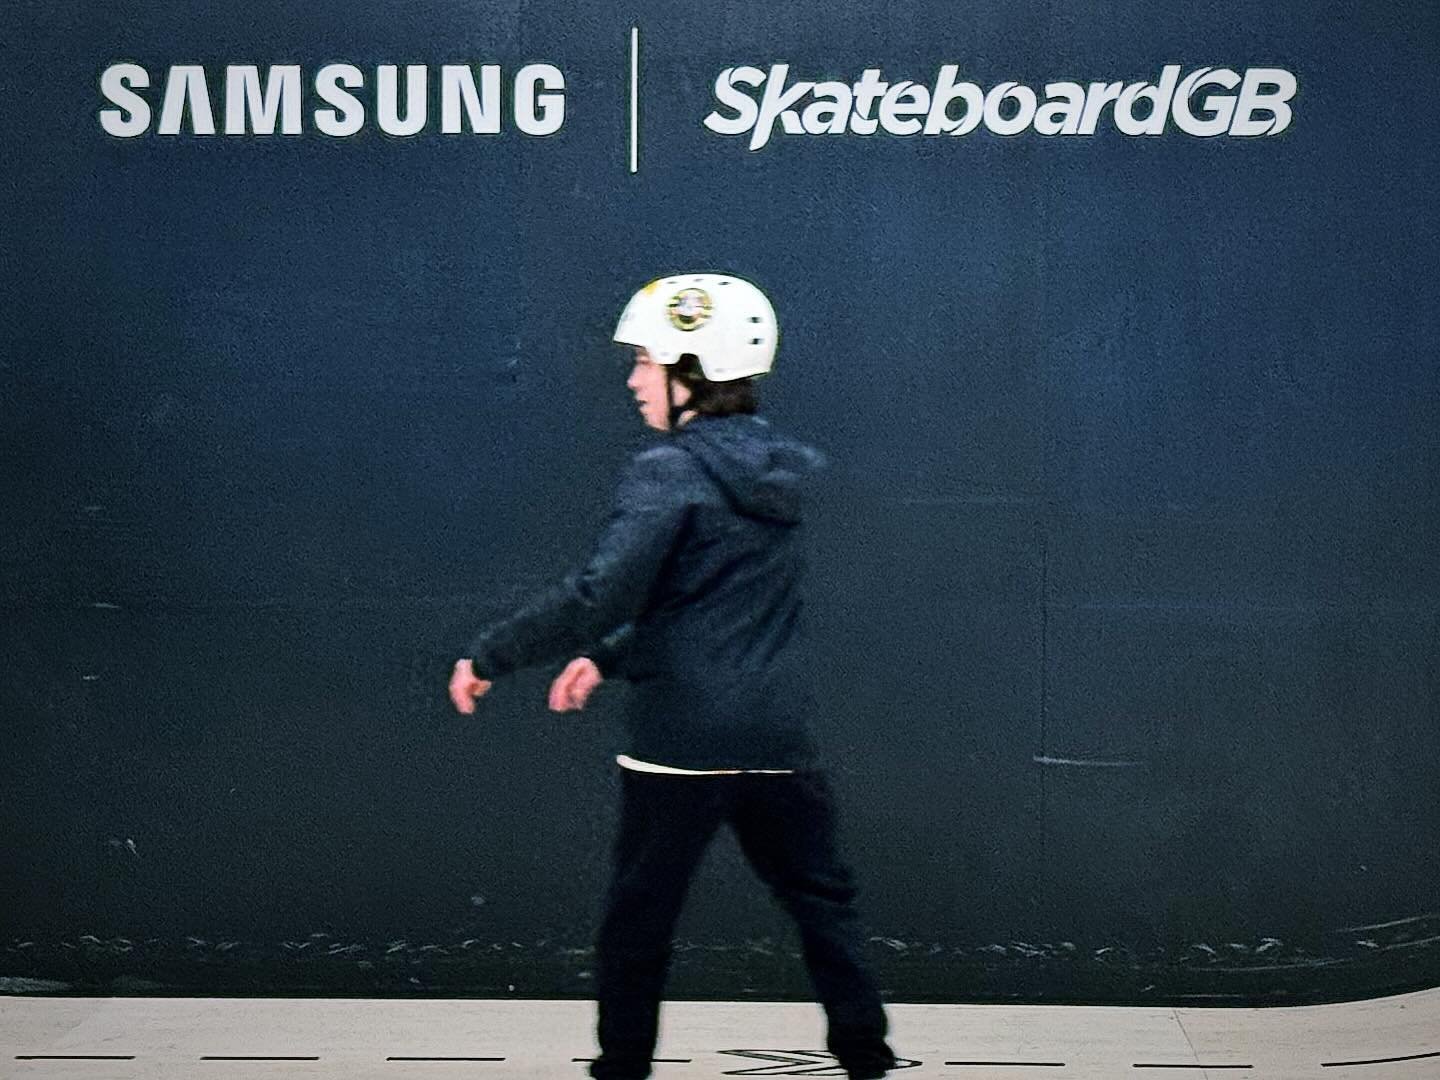 Louis doing his thing in Shoreditch at the @samsunguk Flip pop-up skate park. @northlondonskateclub @samsung #samsung #northlondonskateclub